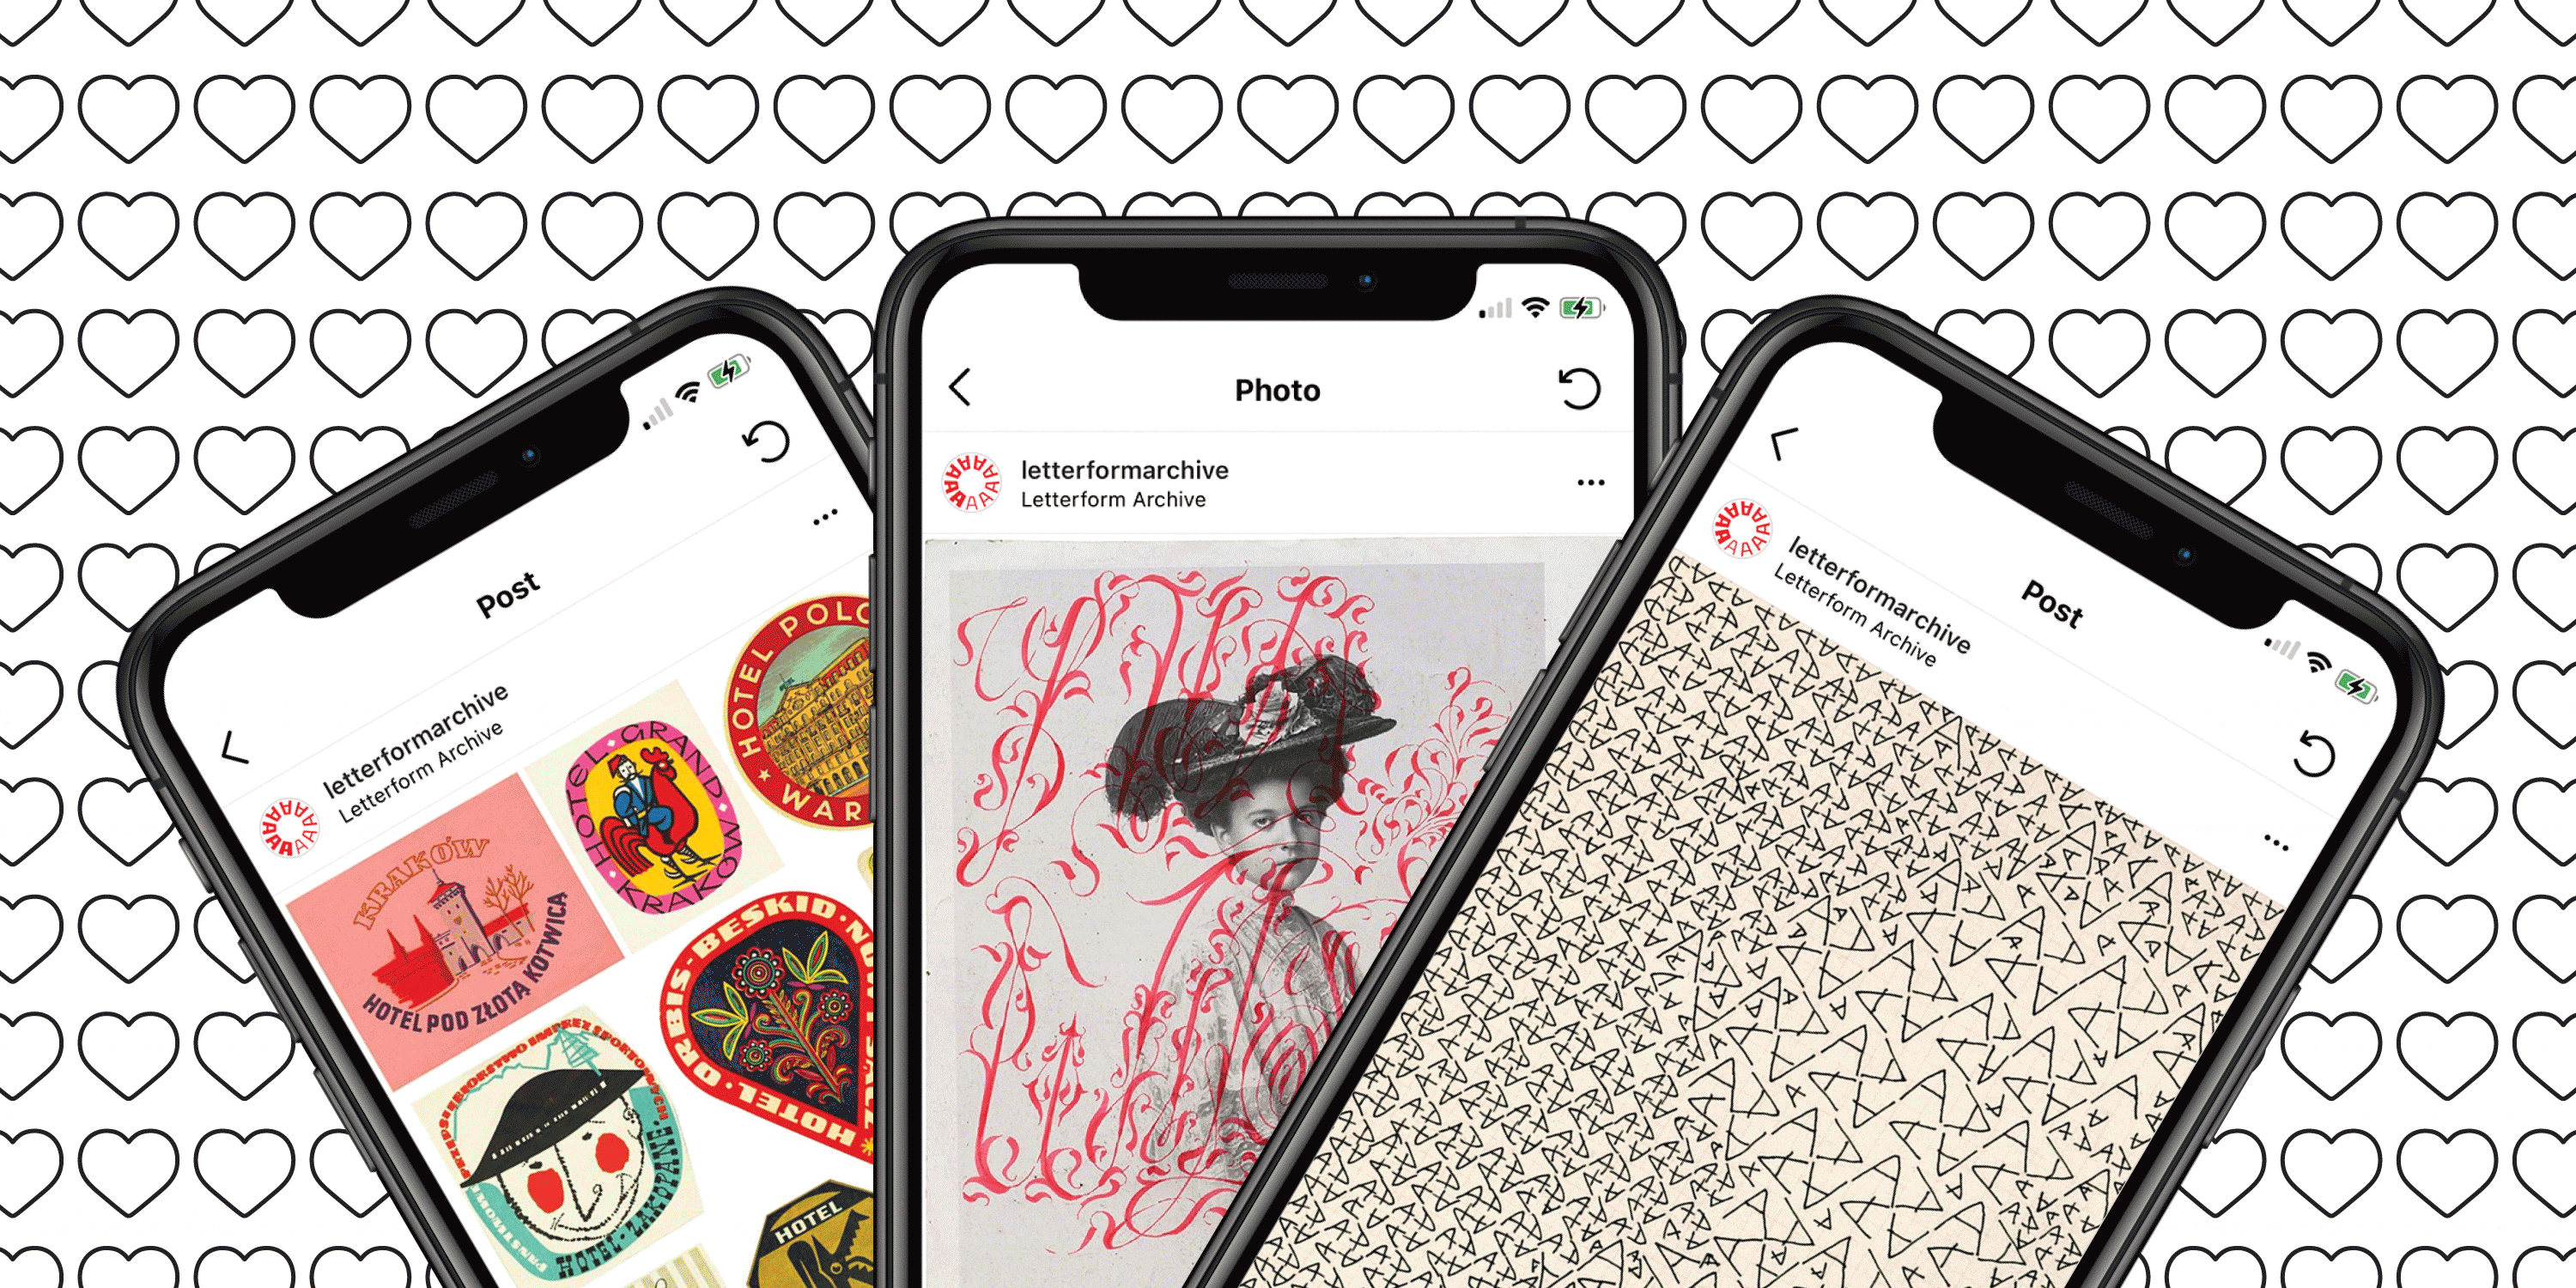 Three popular Letterform Archive posts on Instagram with a heart animation in the background.